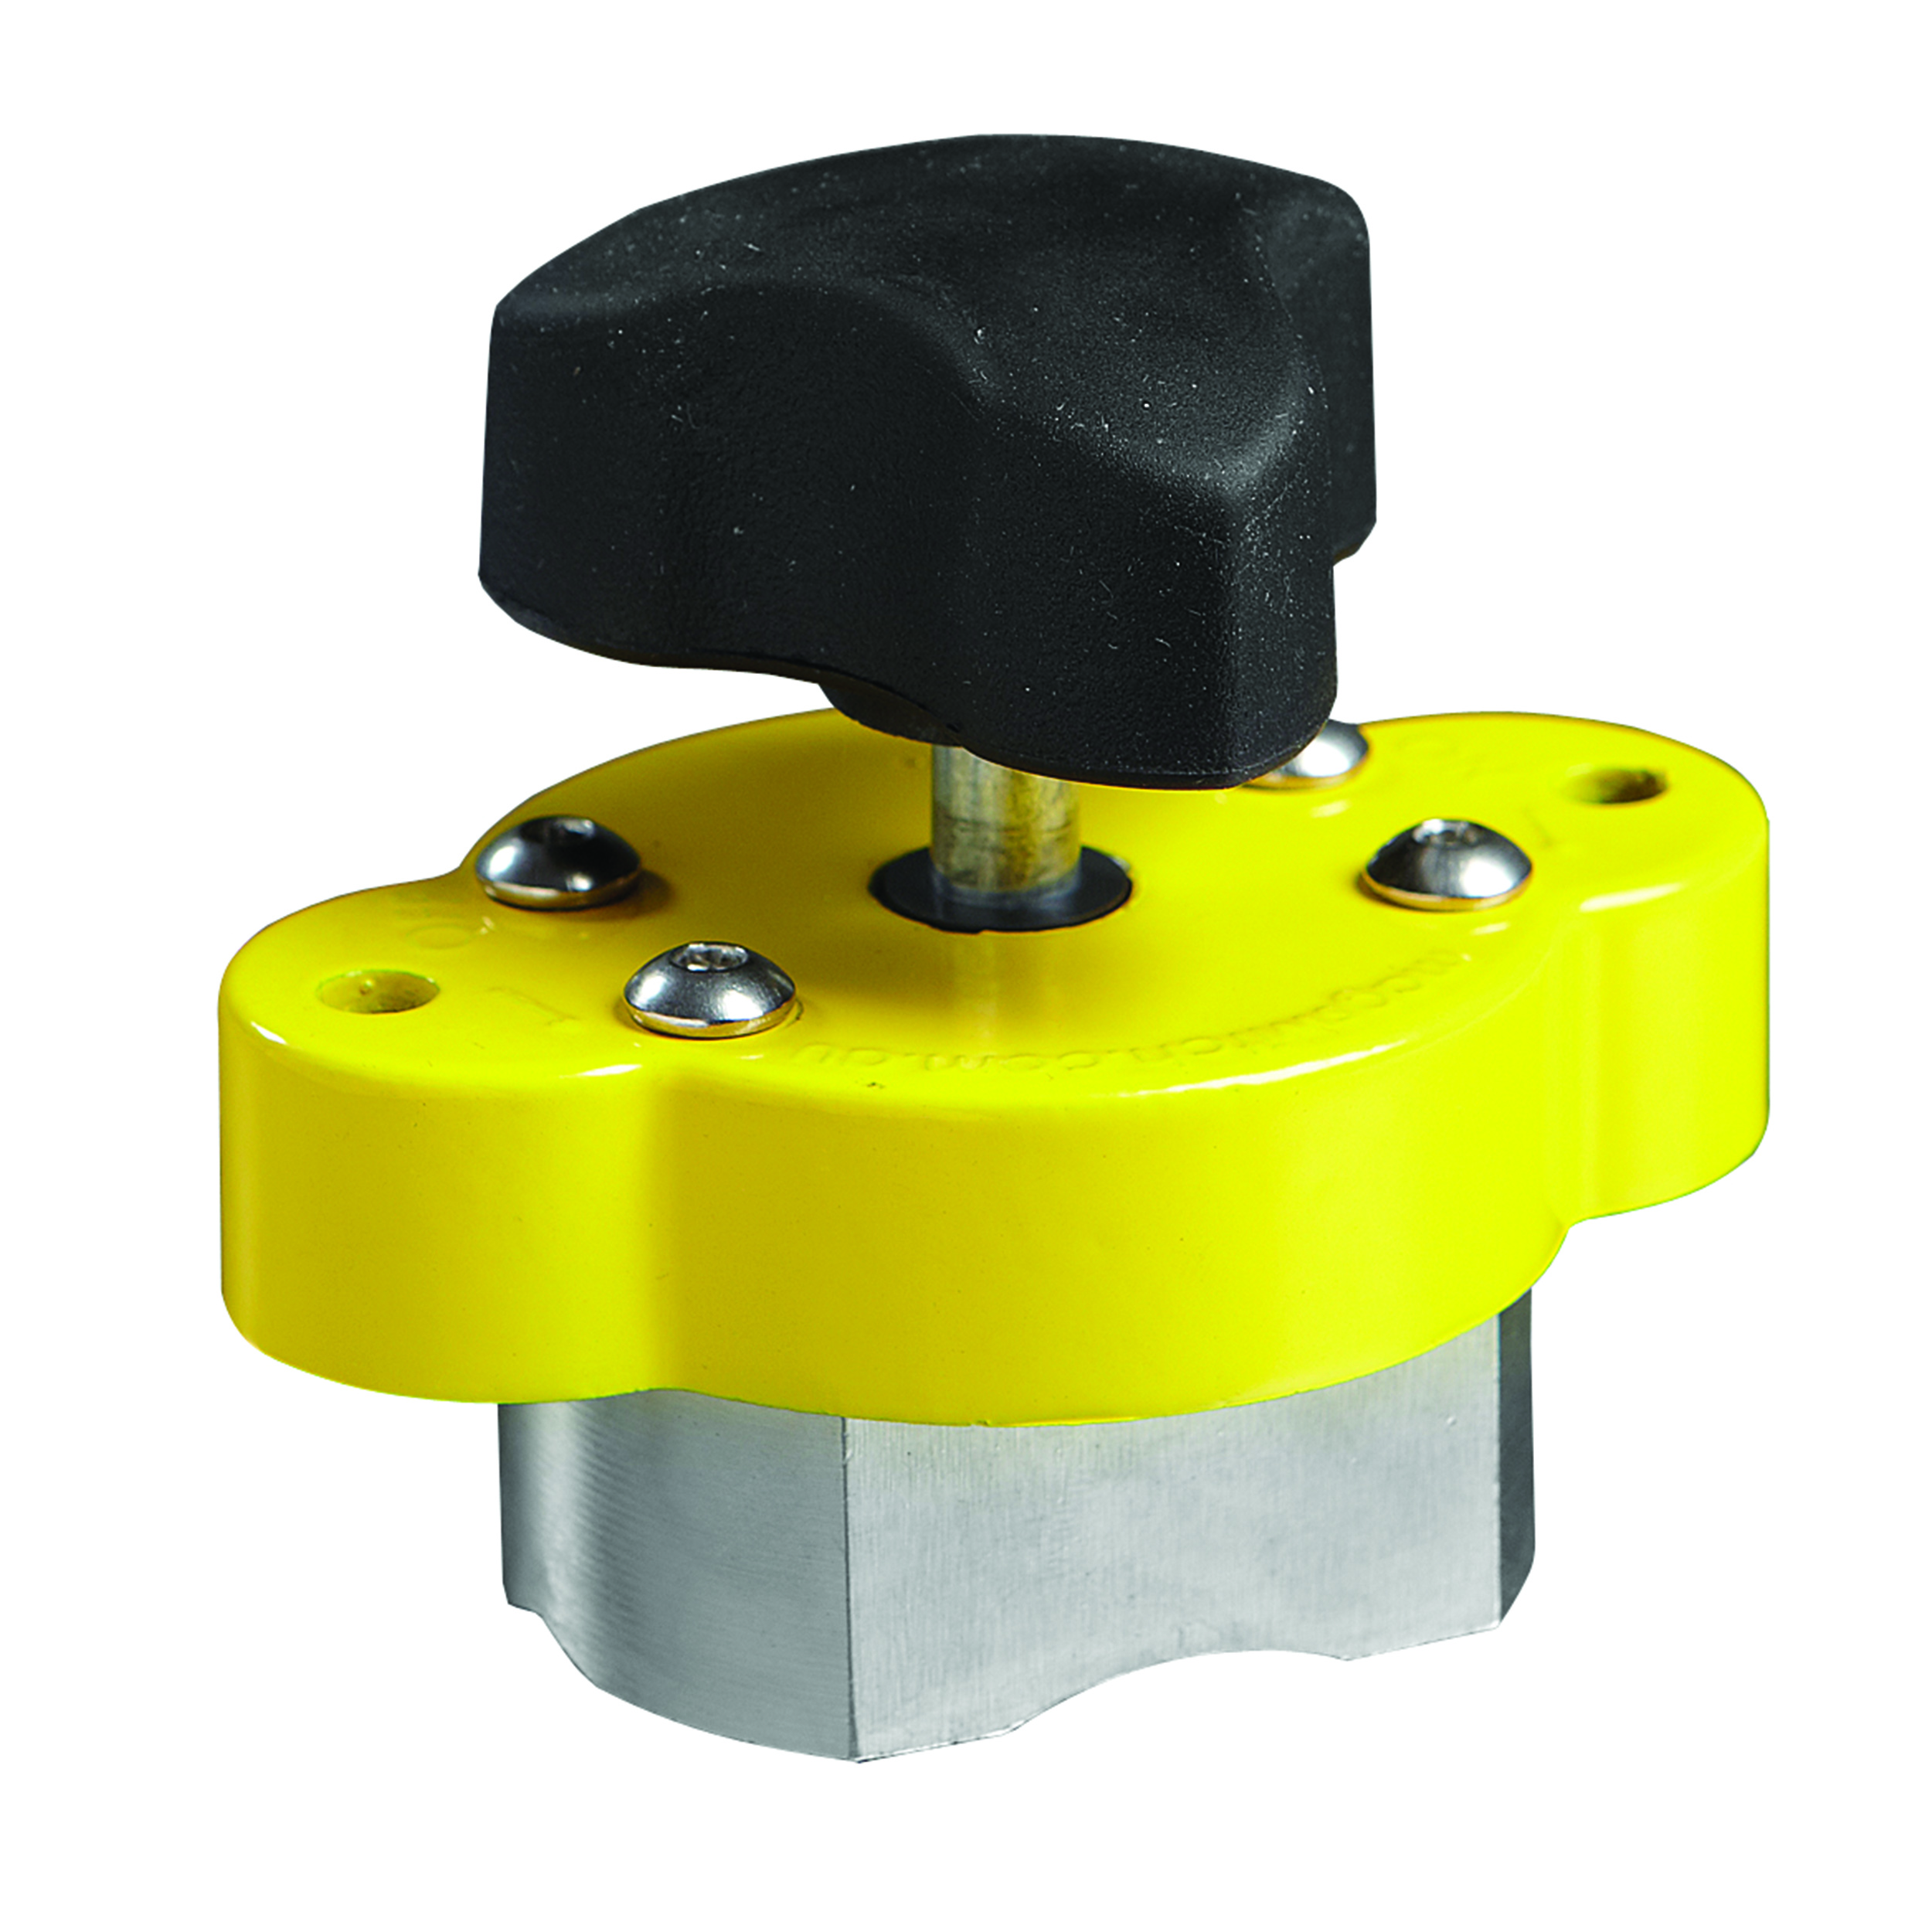 Magjig 235 Switchable Magnet For Jigs And Fixtures